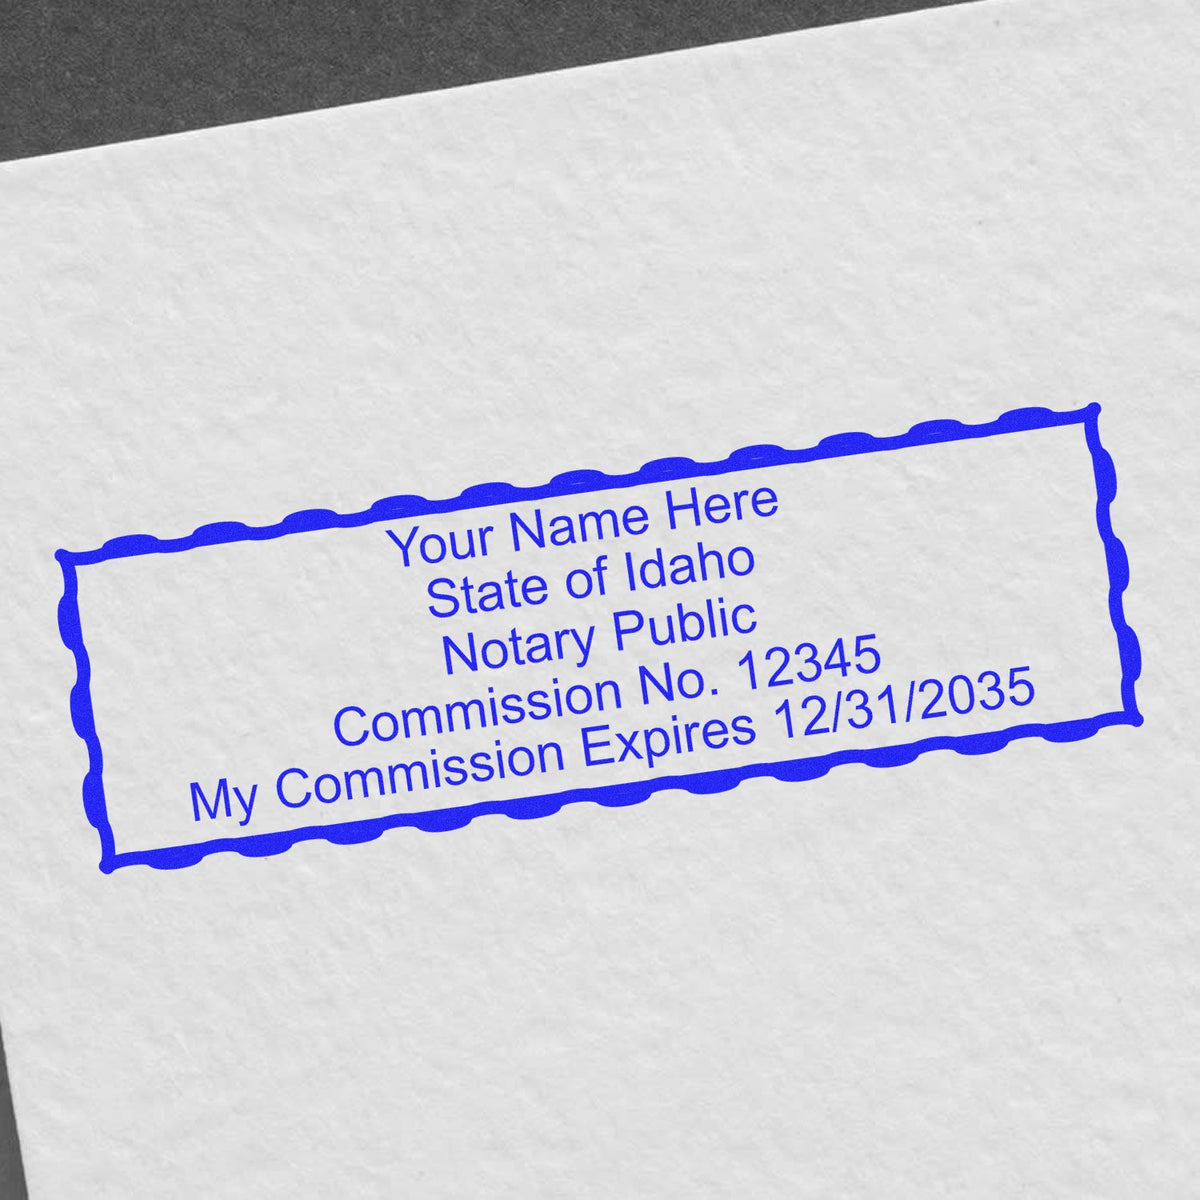 A stamped impression of the Self-Inking Rectangular Idaho Notary Stamp in this stylish lifestyle photo, setting the tone for a unique and personalized product.